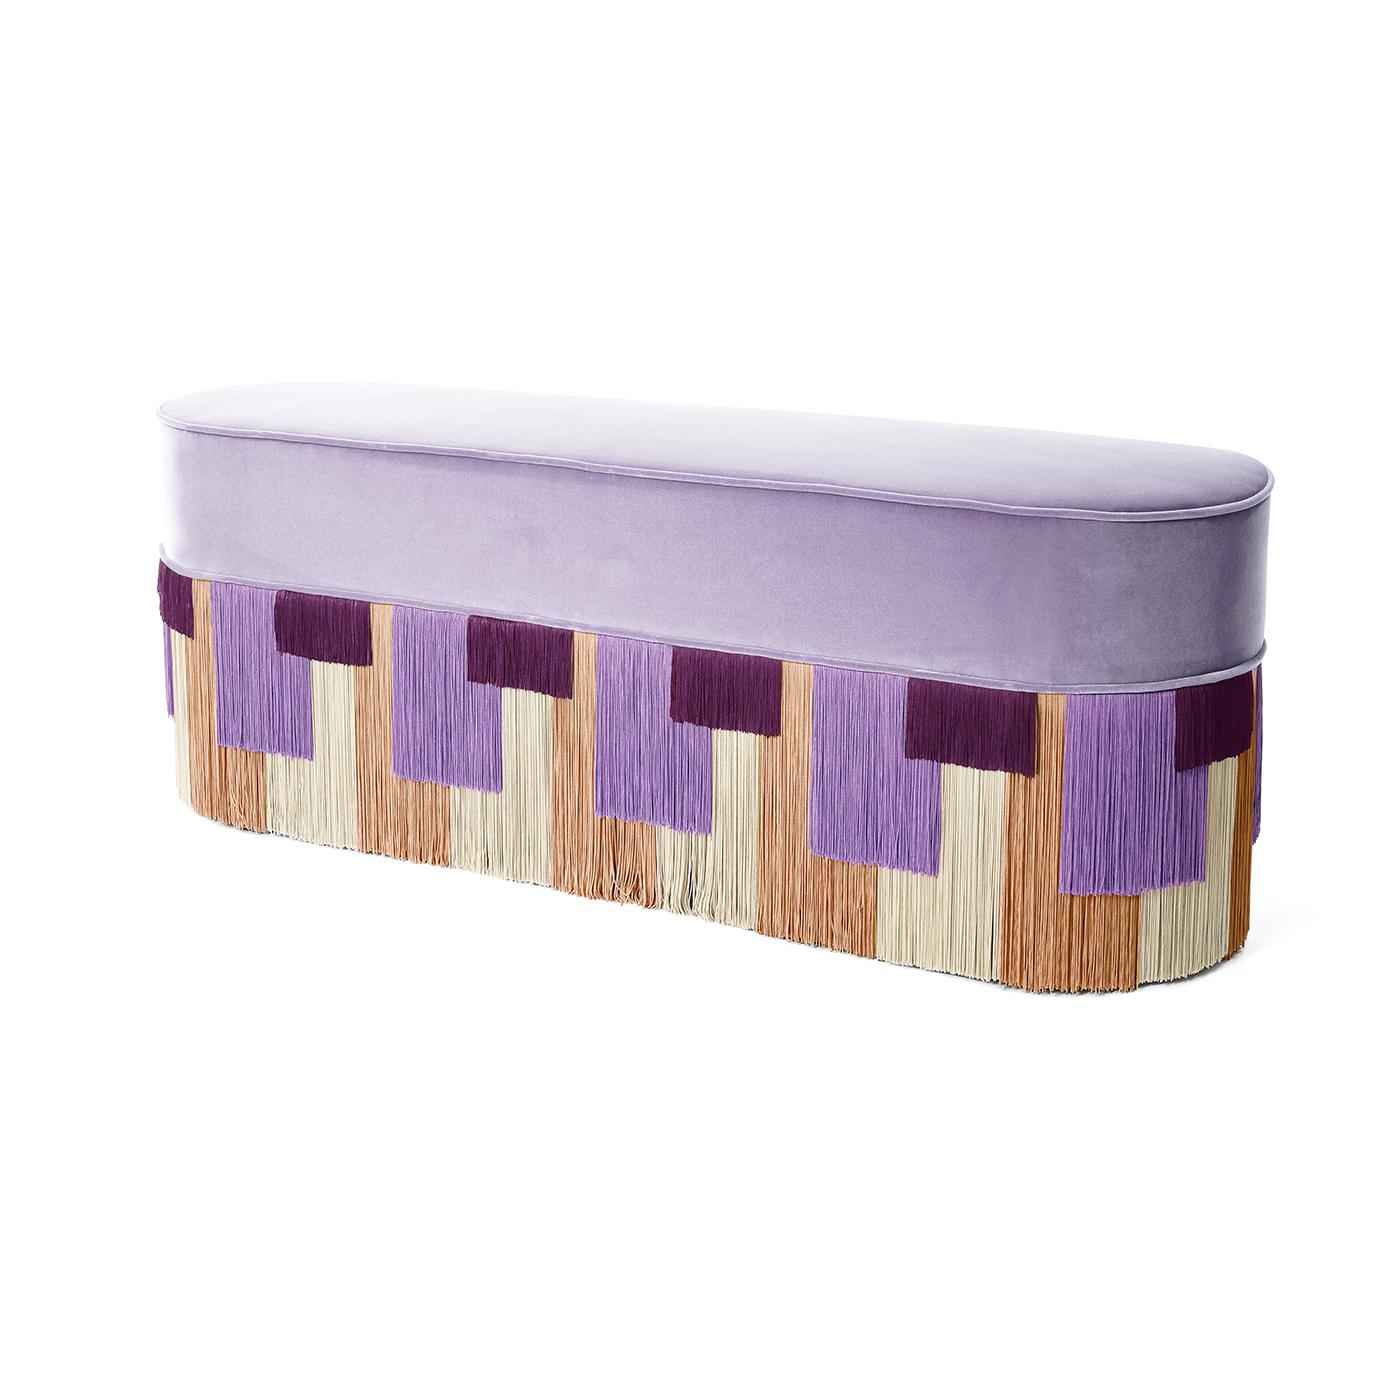 A long and classy pouf in a lilac color that has an array of fringes of different lengths and colors which appears as a sequence of colorful geometric shapes. The base is in painted beech wood and the top is comfortably padded and upholstered with